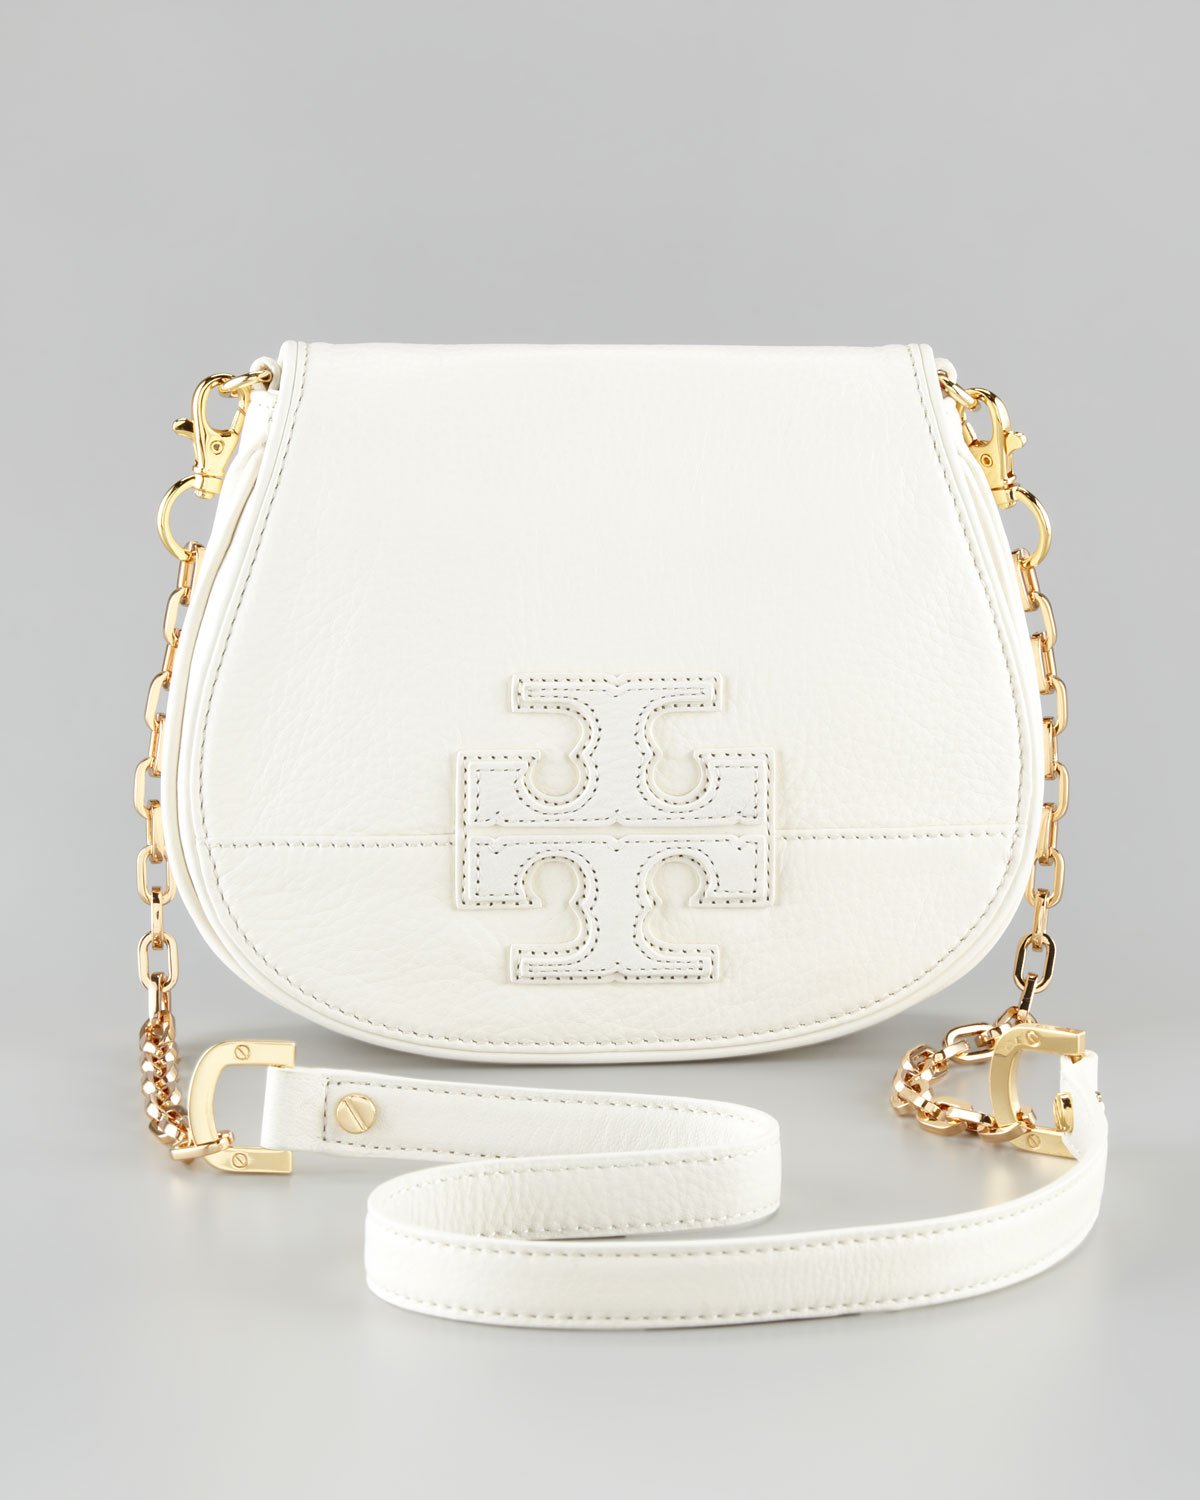 Tory Burch Stacked Logo Crossbody Bag in White - Lyst